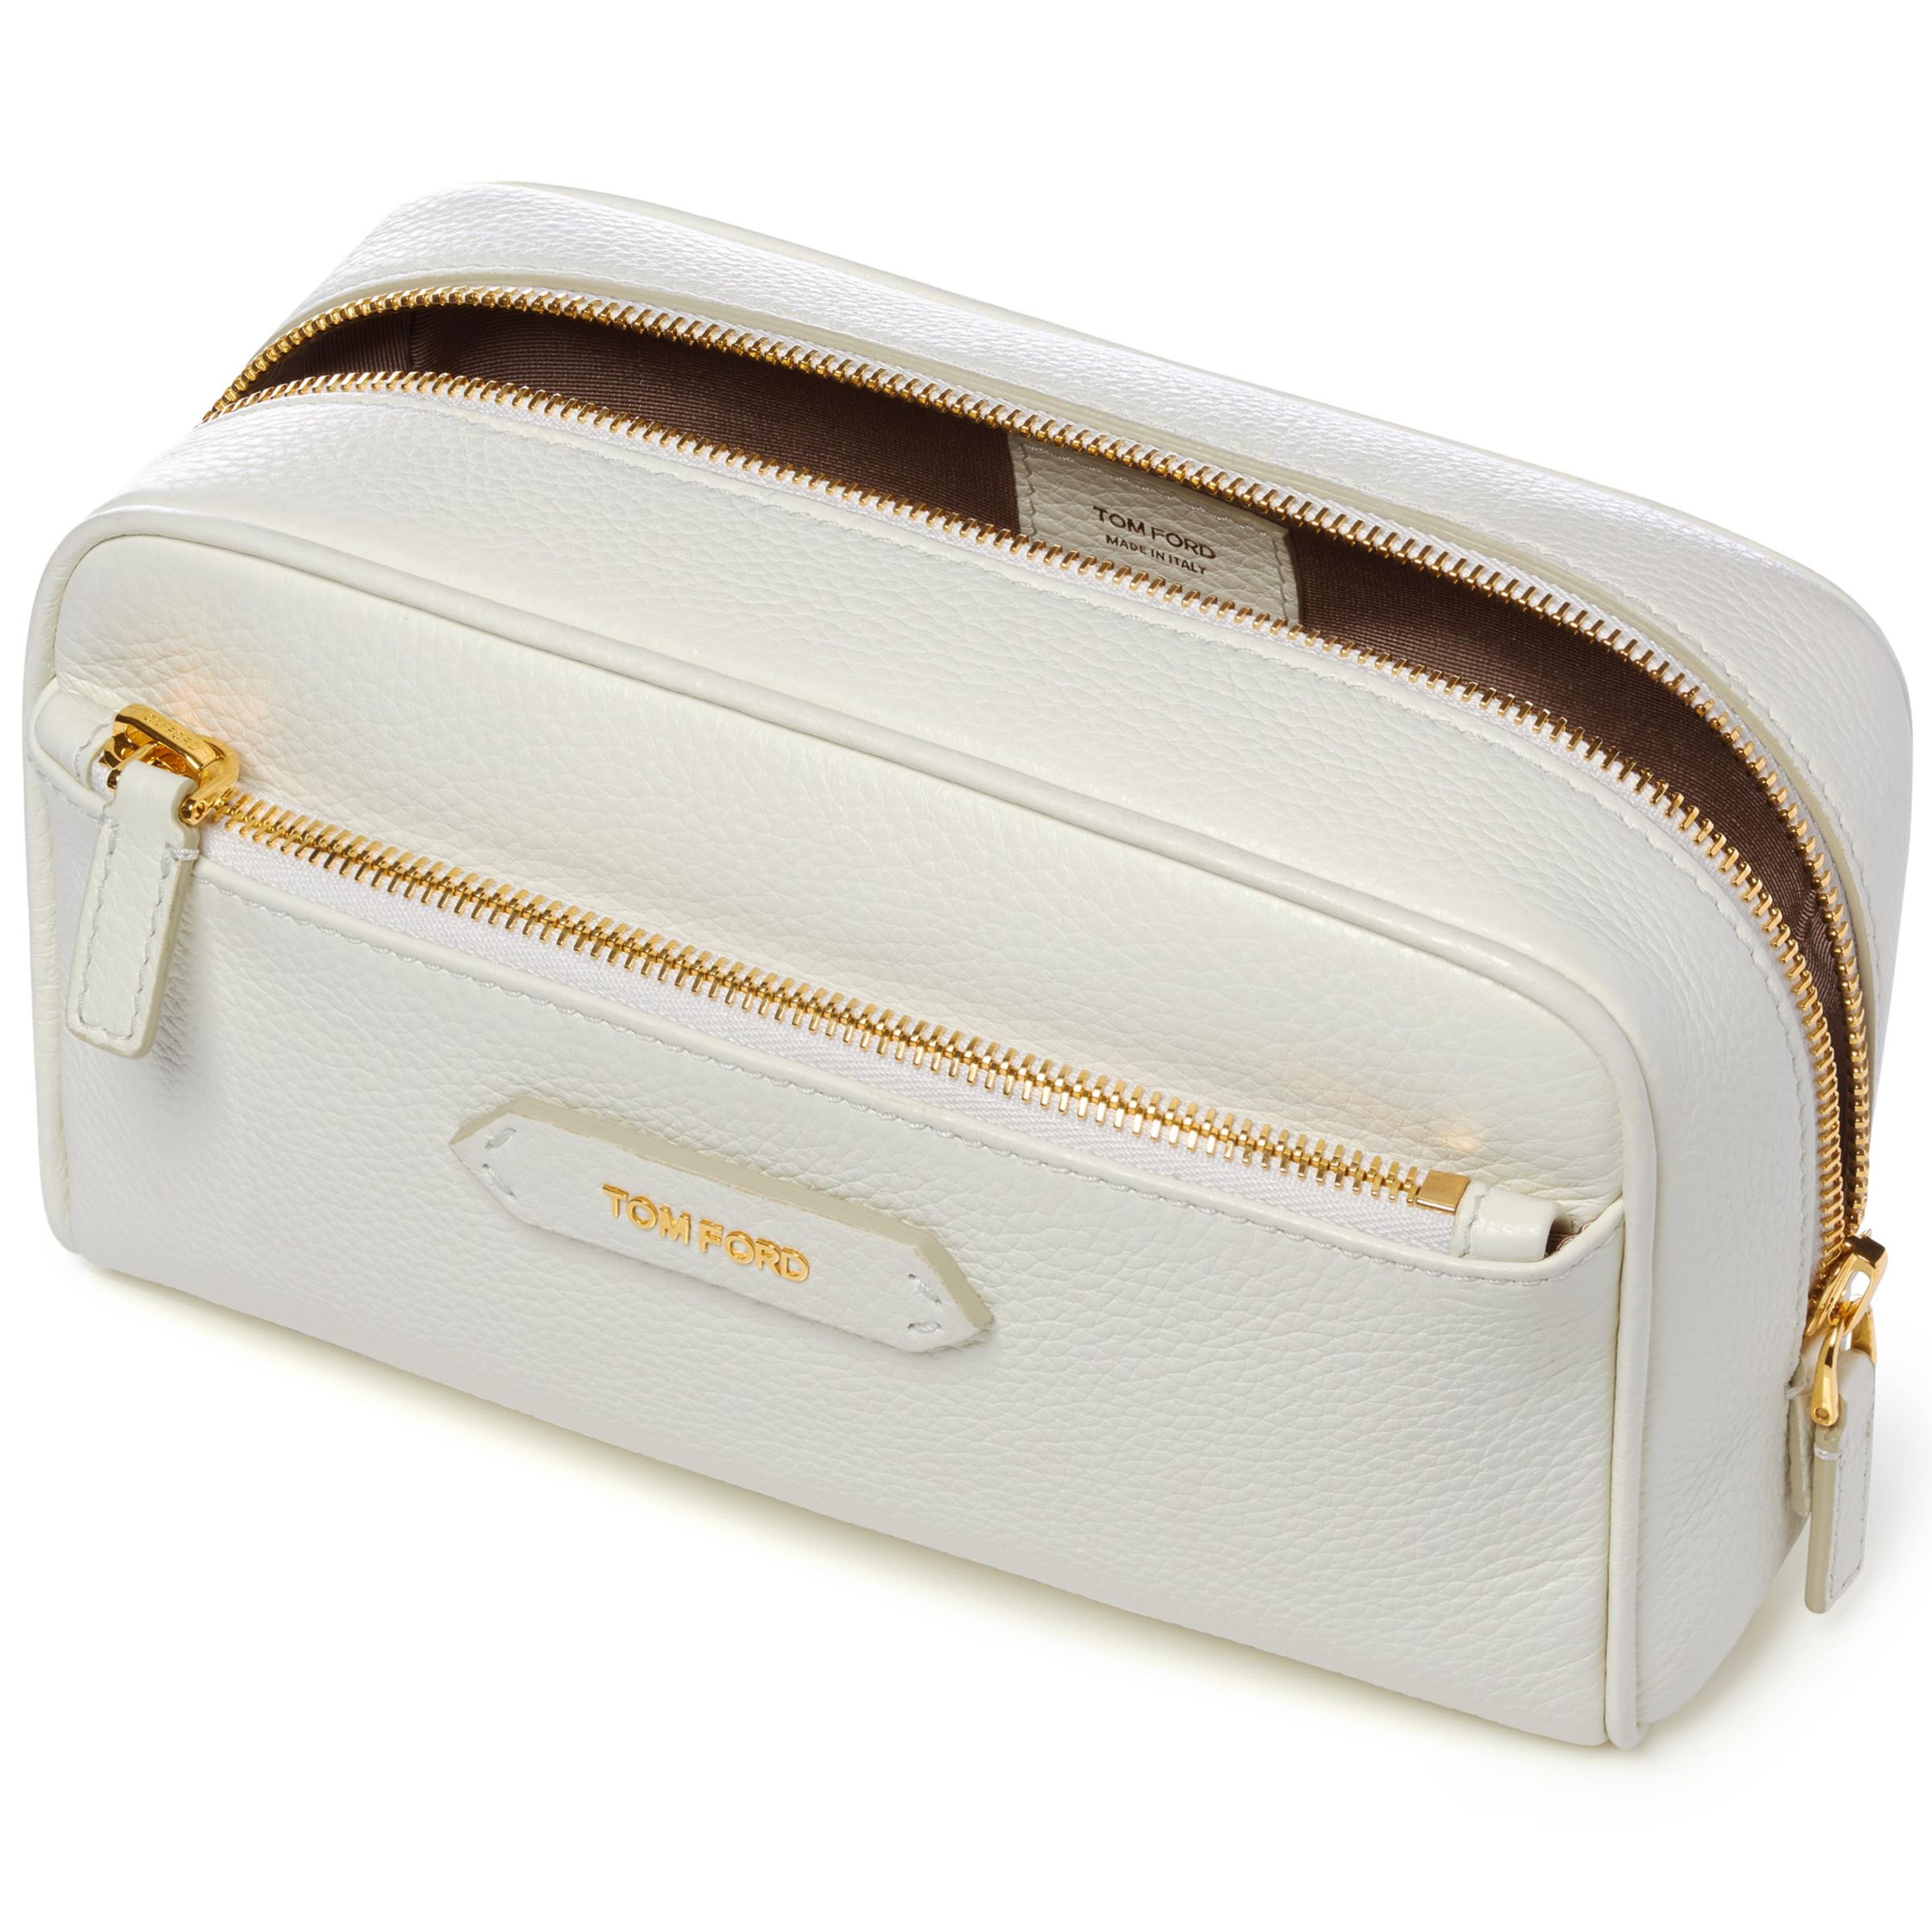 Download Buy TOM FORD Soleil Small Leather Cosmetic Bag, White ...